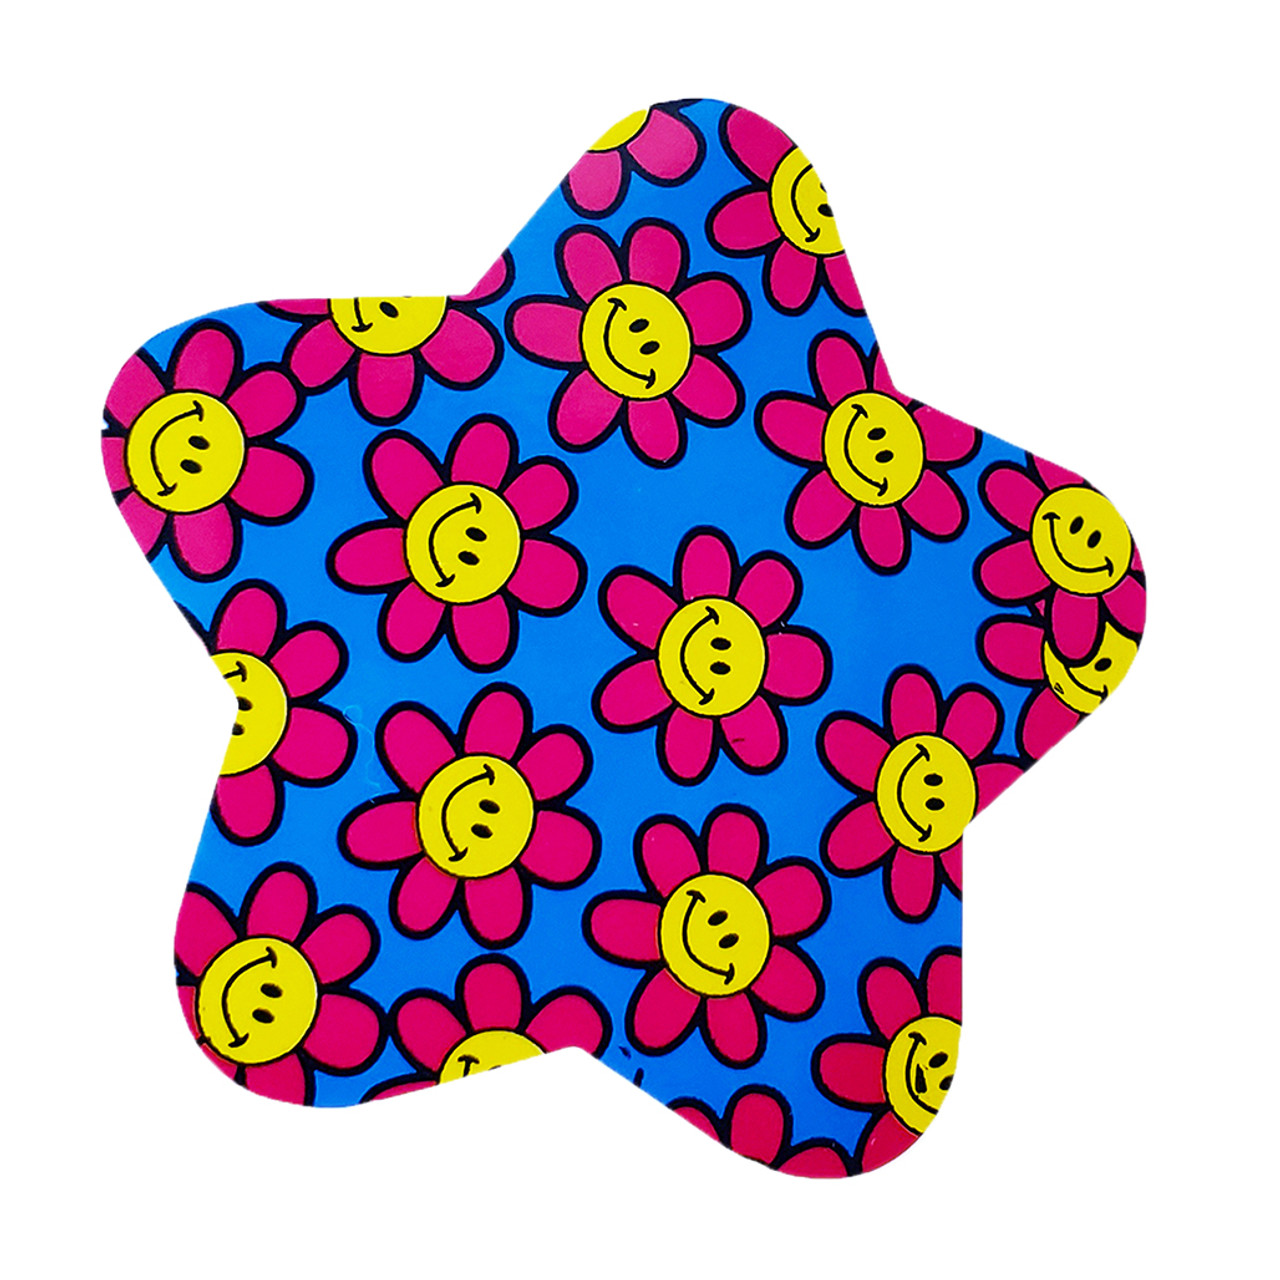 Buy Funky Star Stickers Online at Low Prices